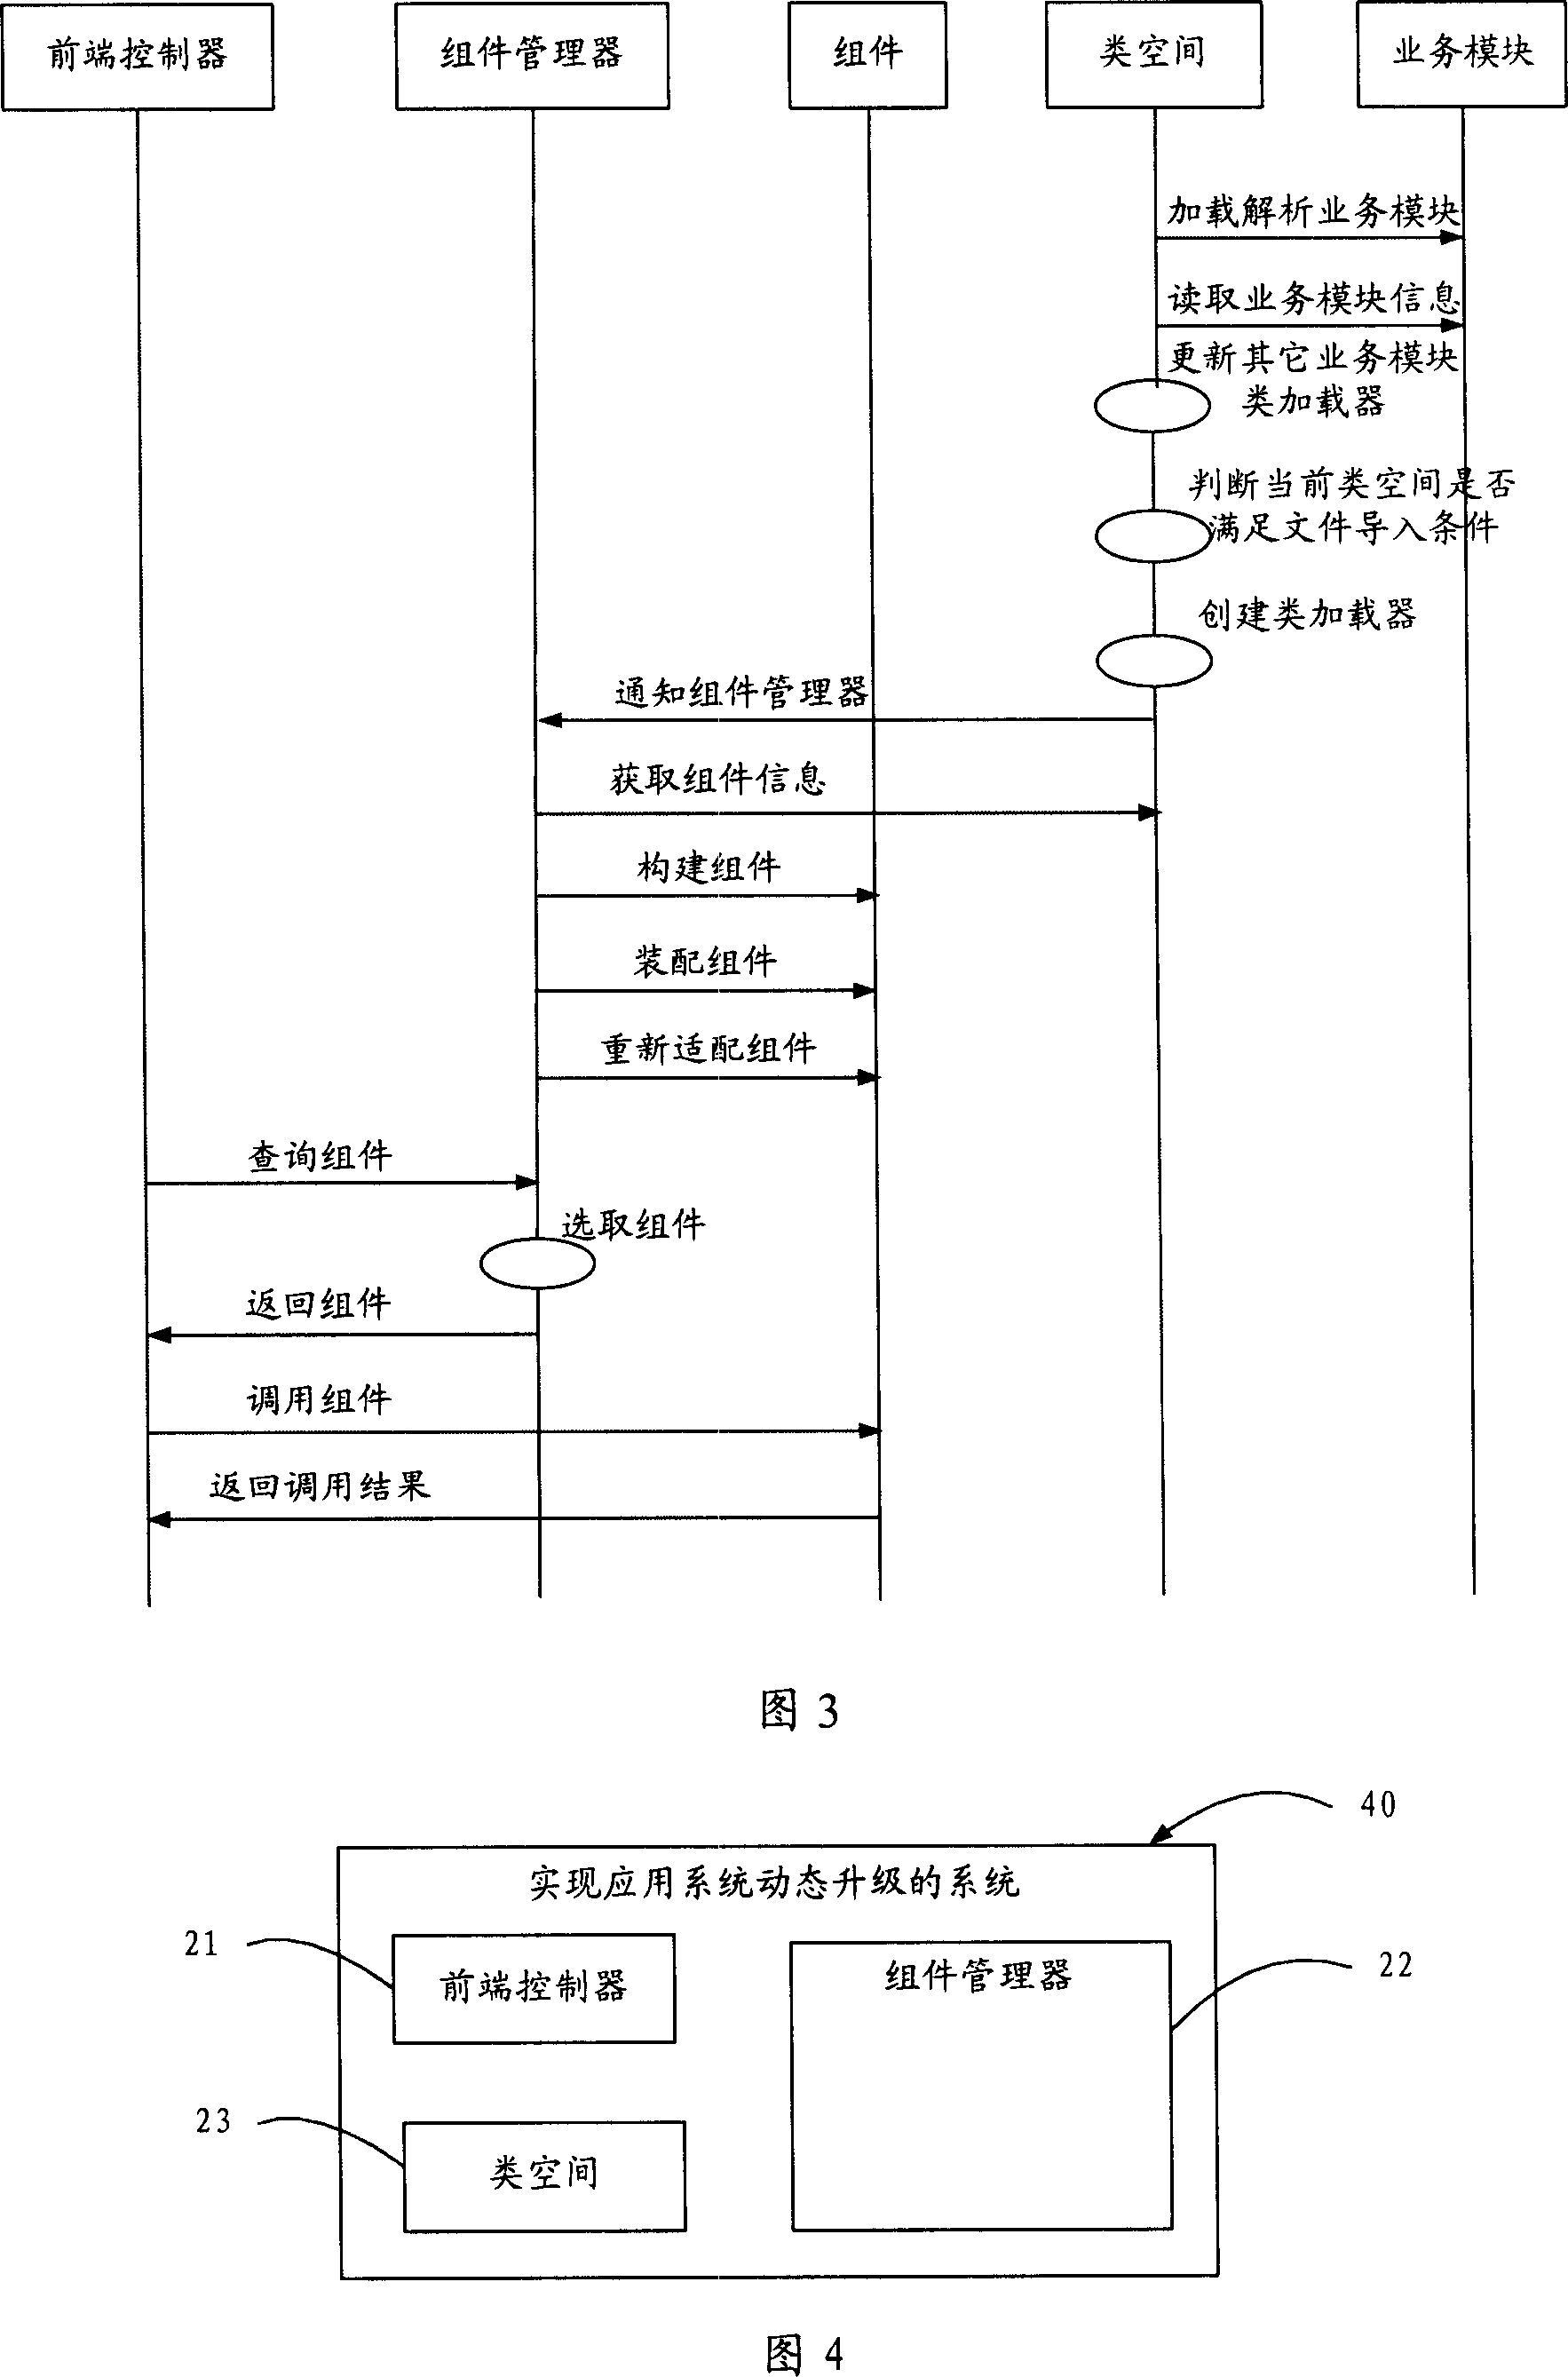 Method and system for implementing dynamic upgrade of application system